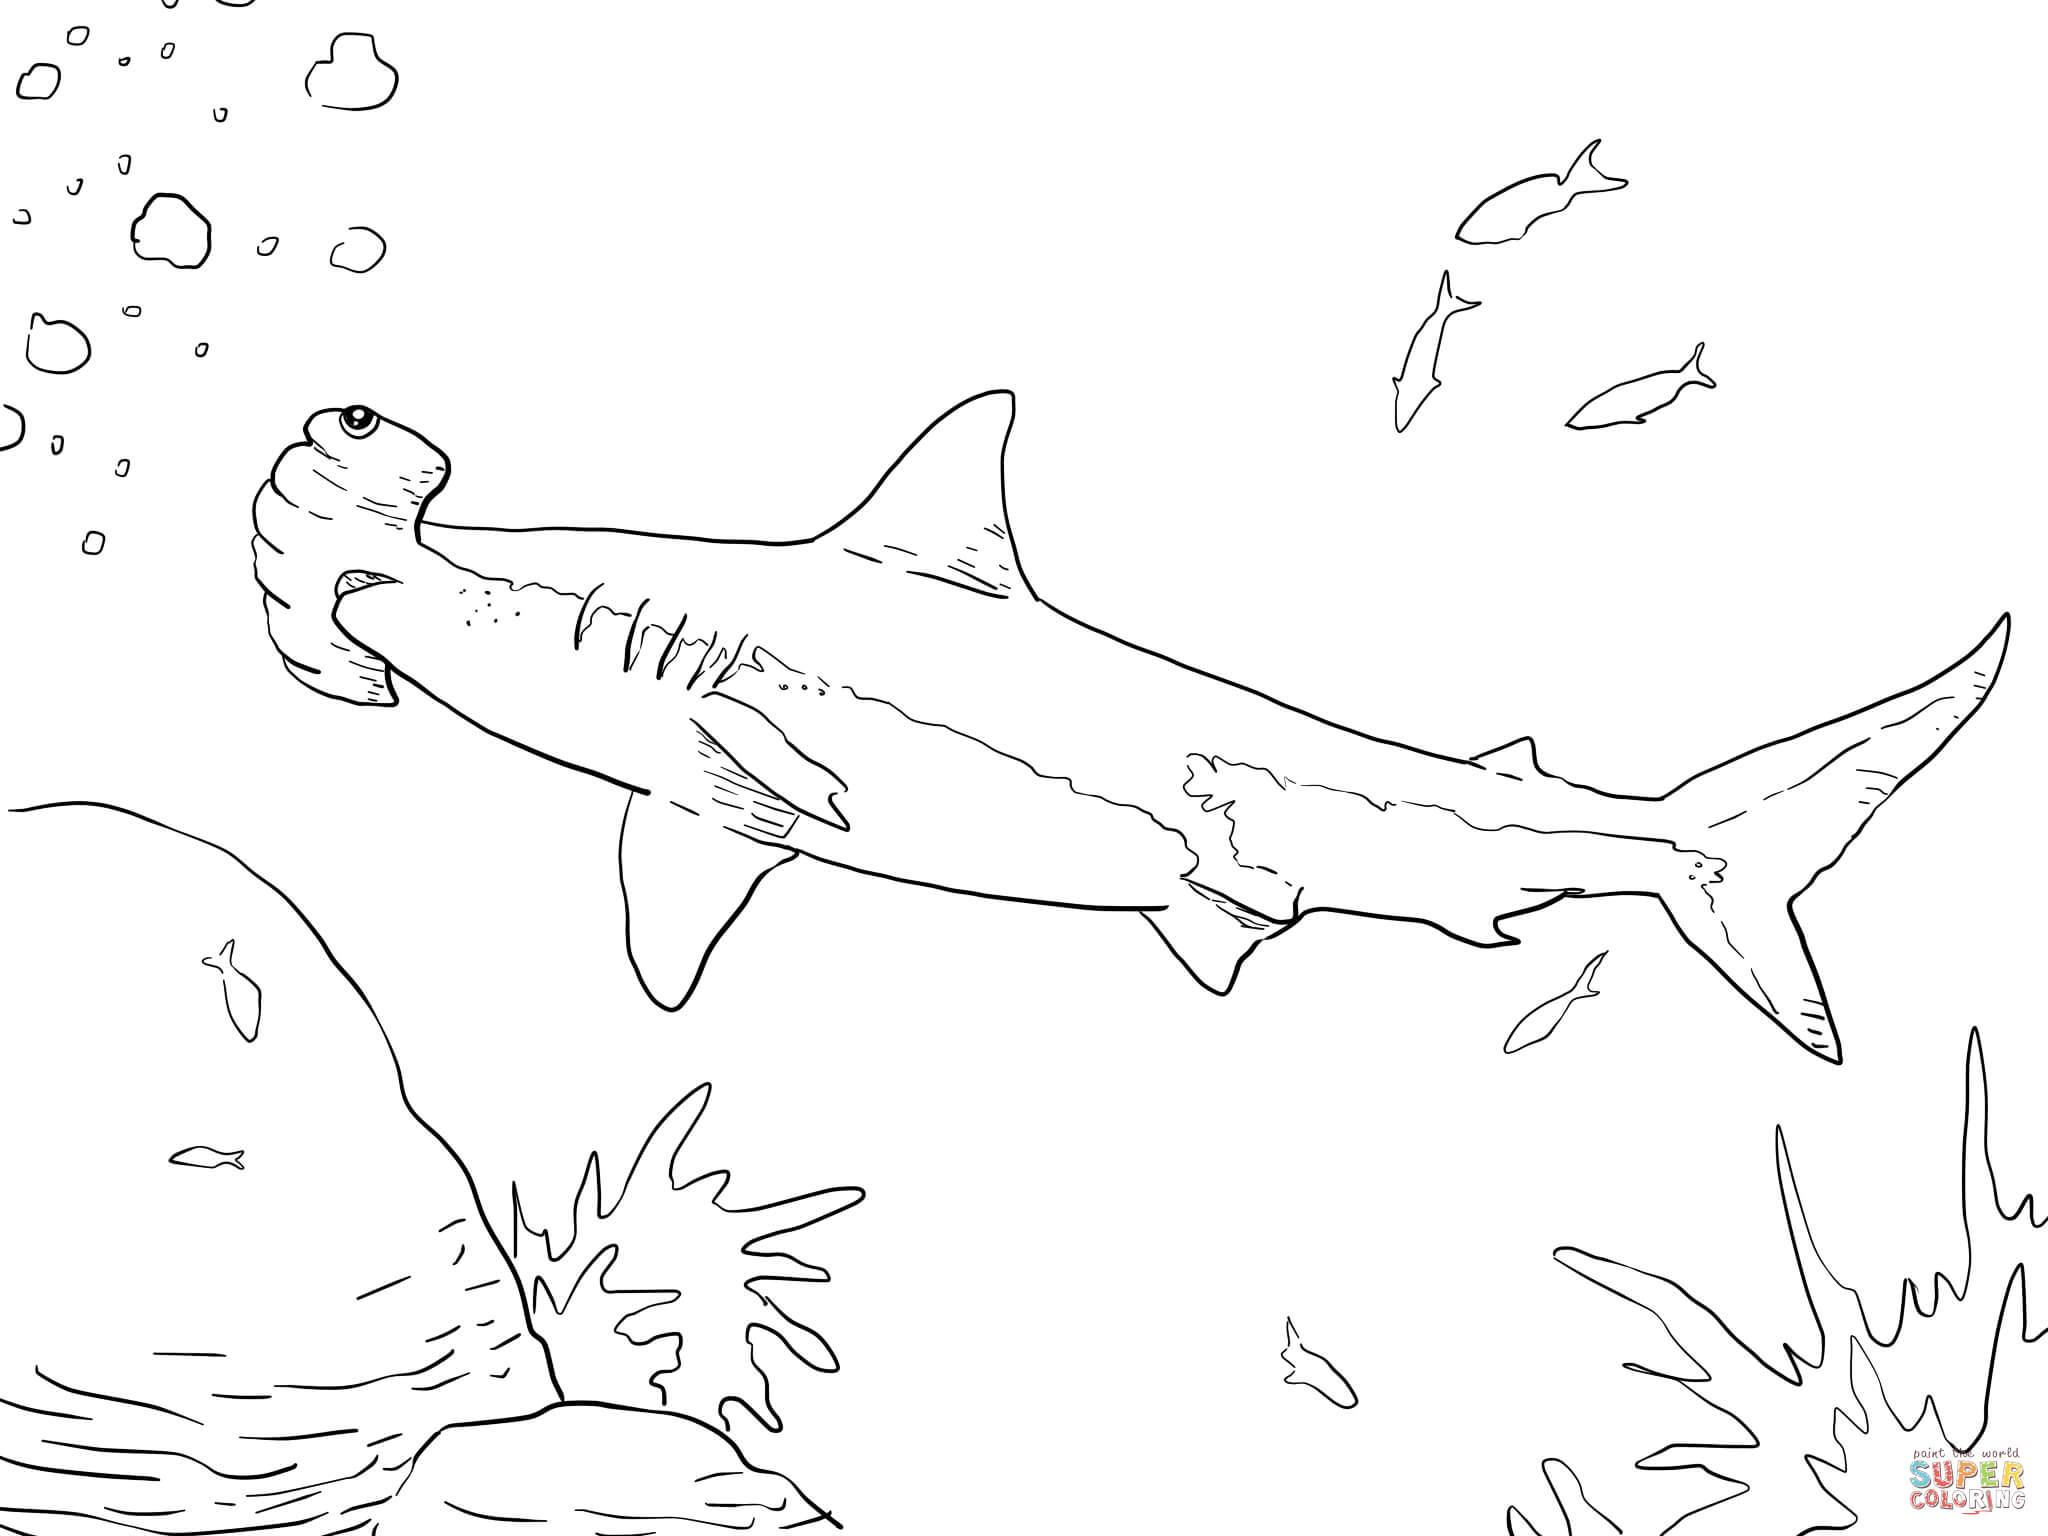 Great Hammerhead Shark coloring page | Free Printable Coloring Pages